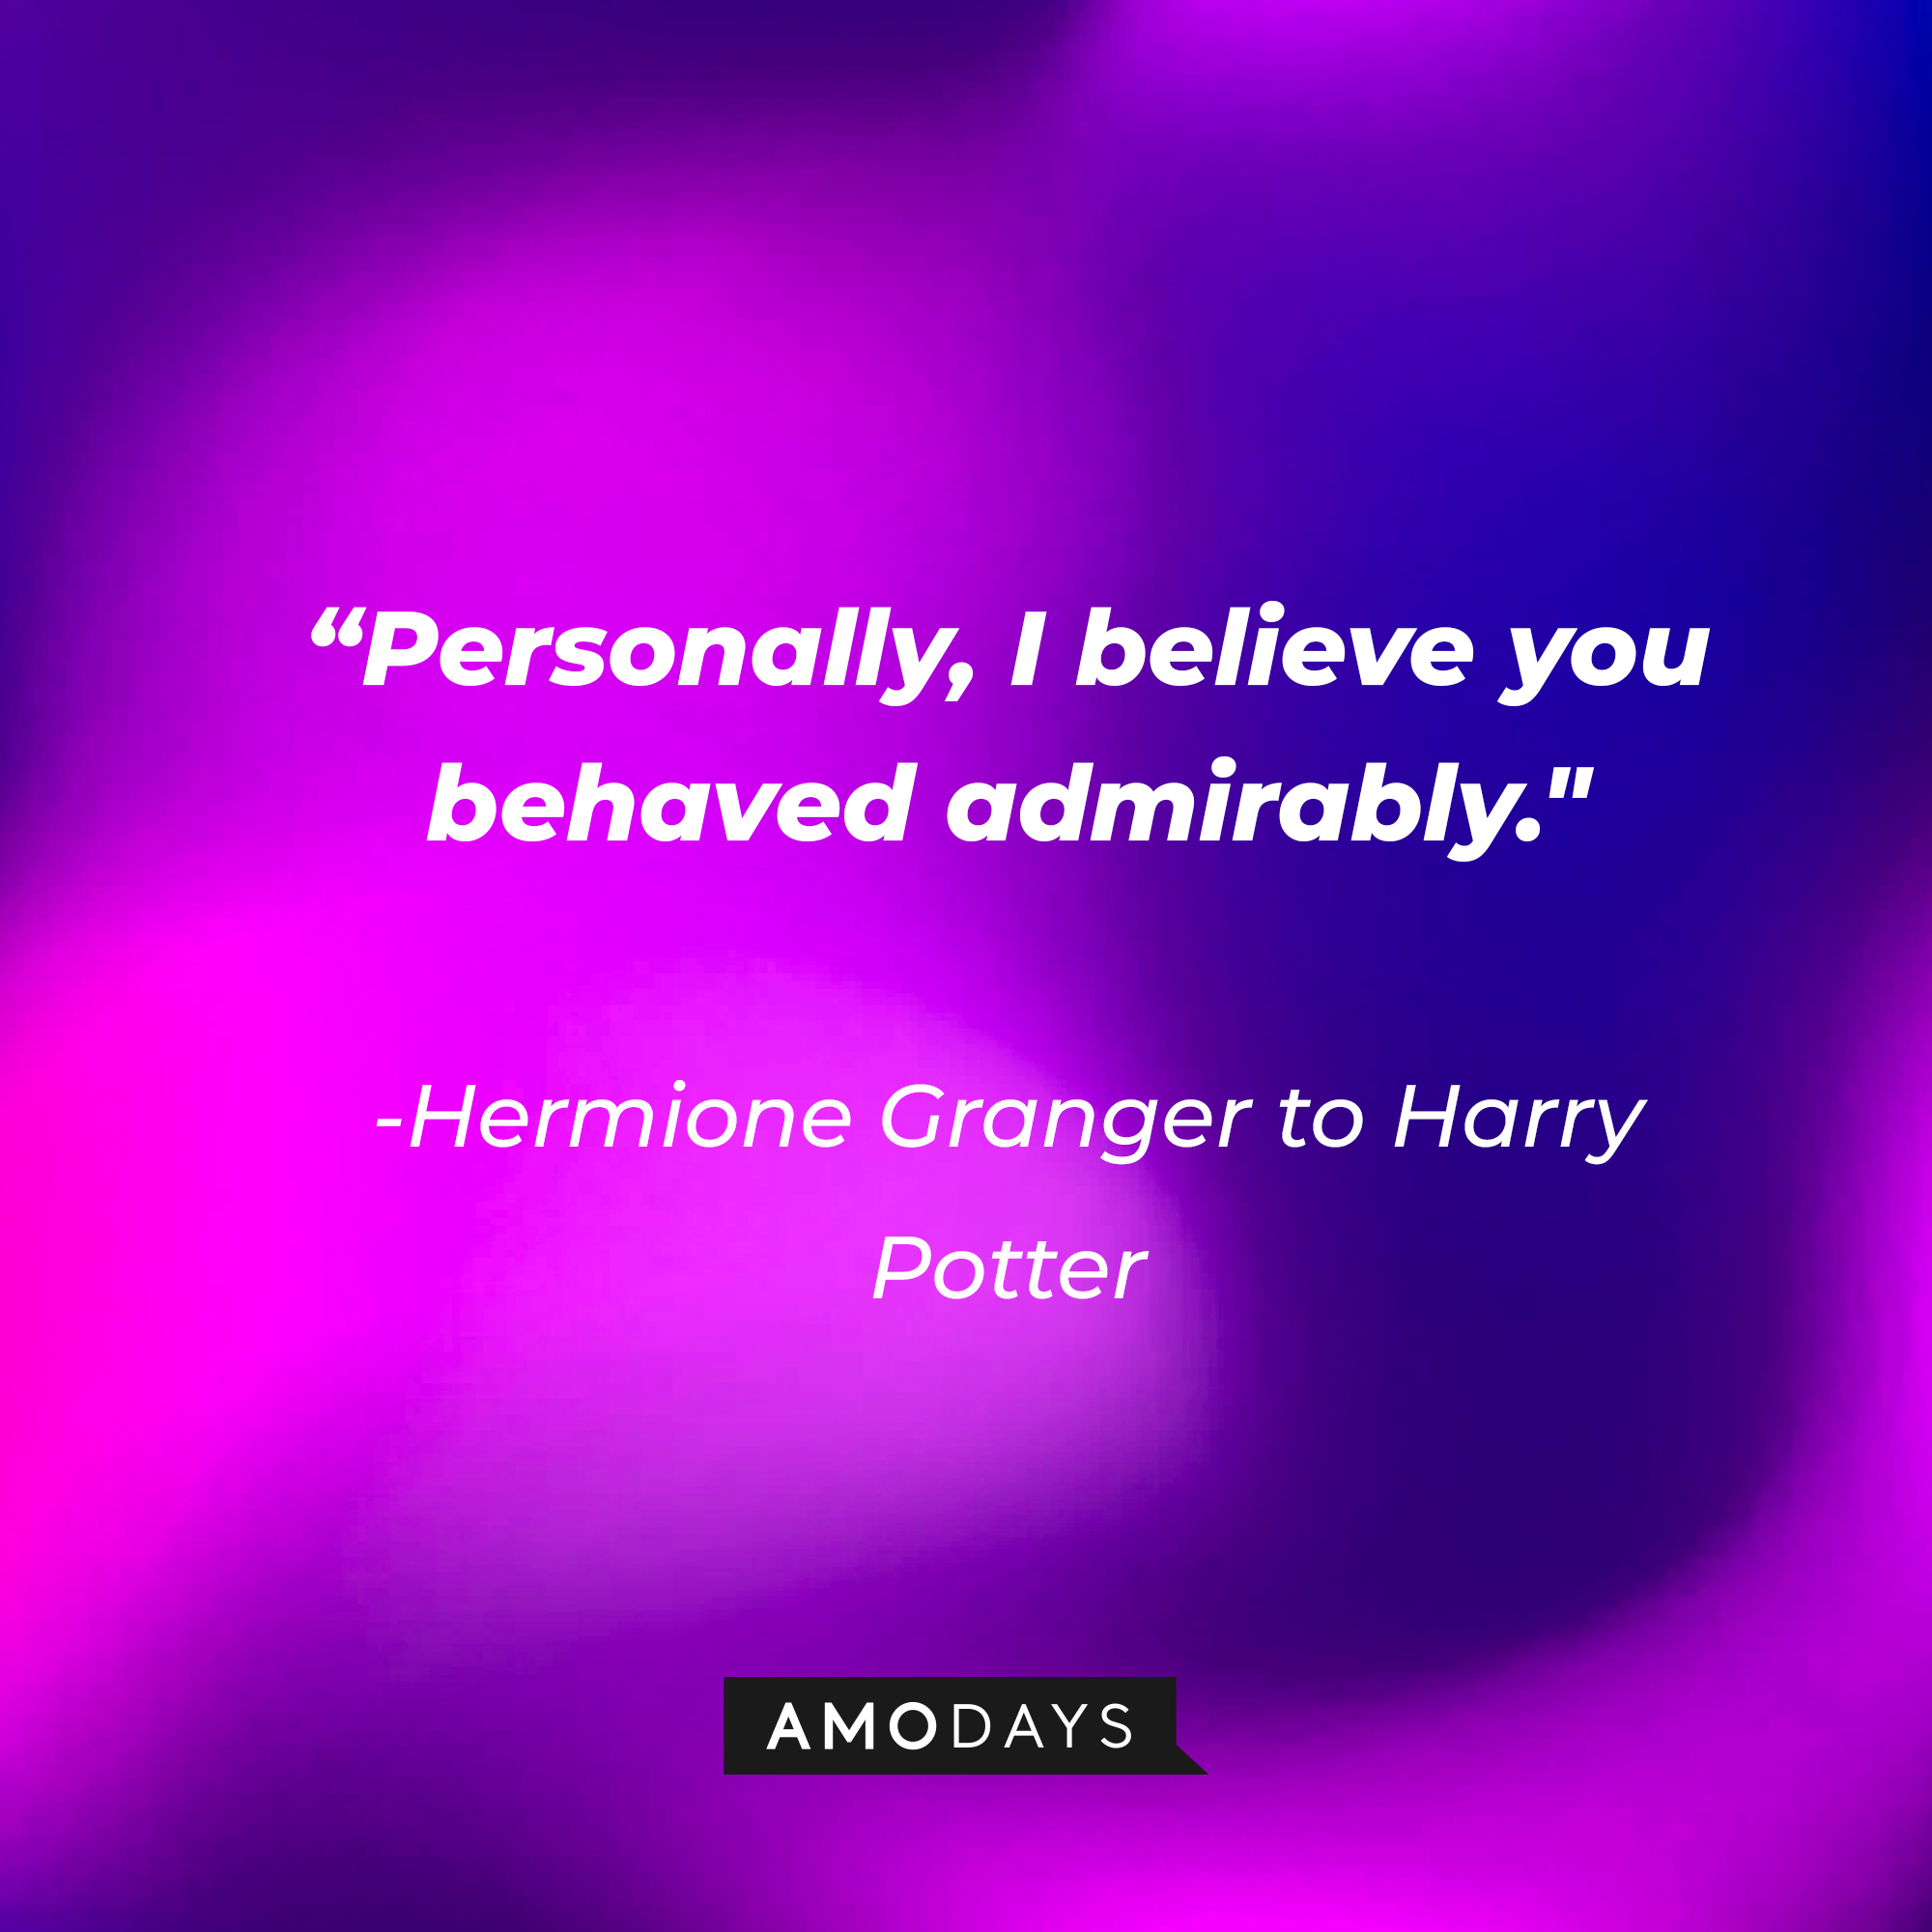 Hermione Granger's quote: Personally, I believe you behaved admirably." | Image: Amodays